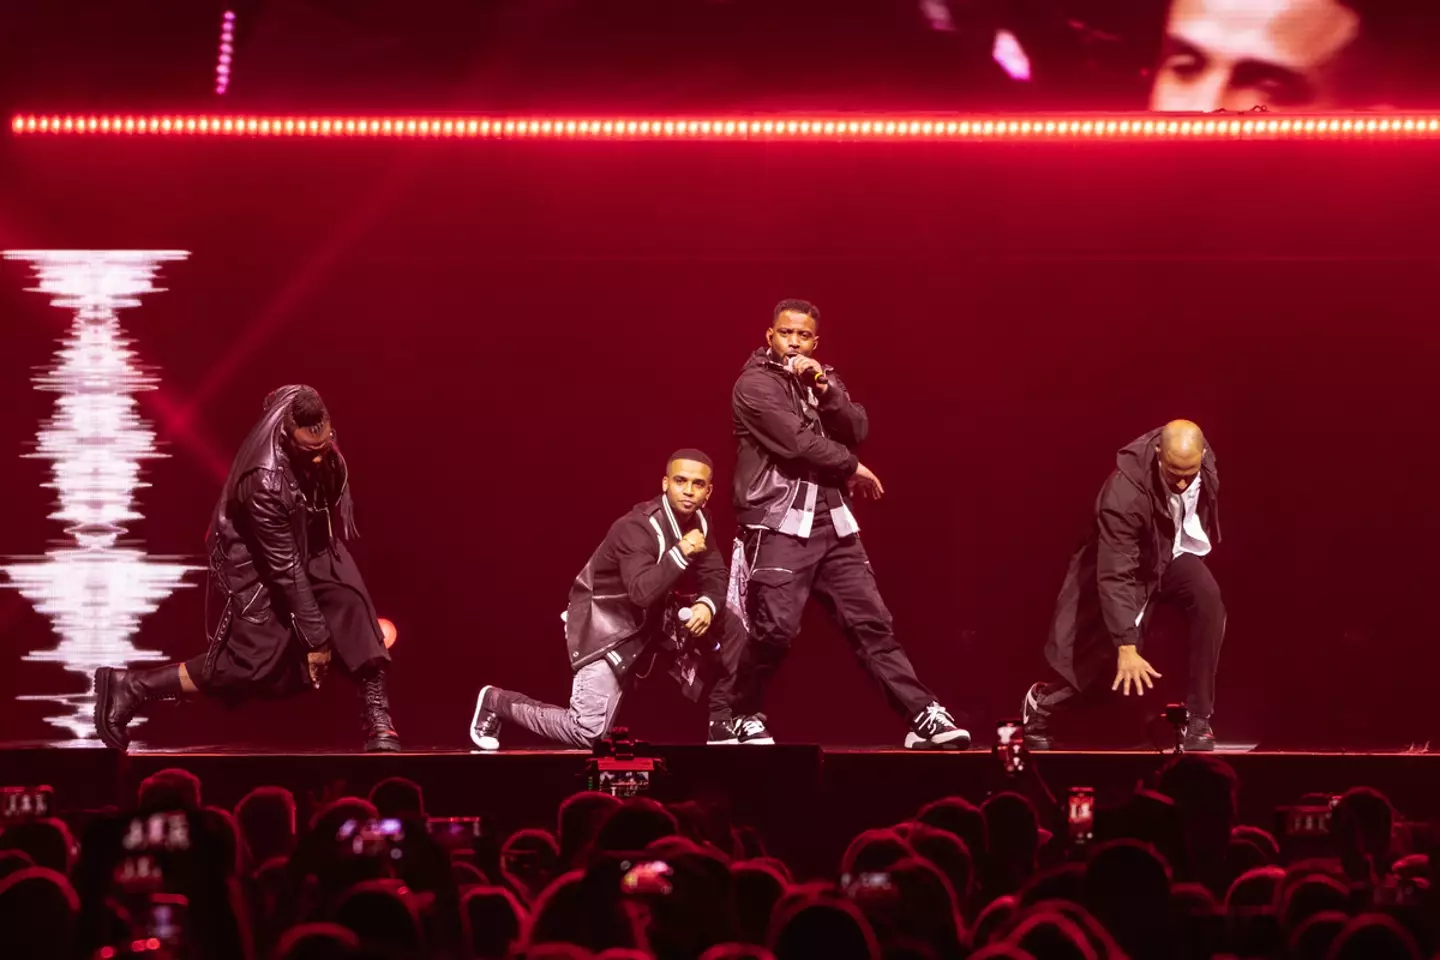 JLS were very recently touring the UK and Ireland.